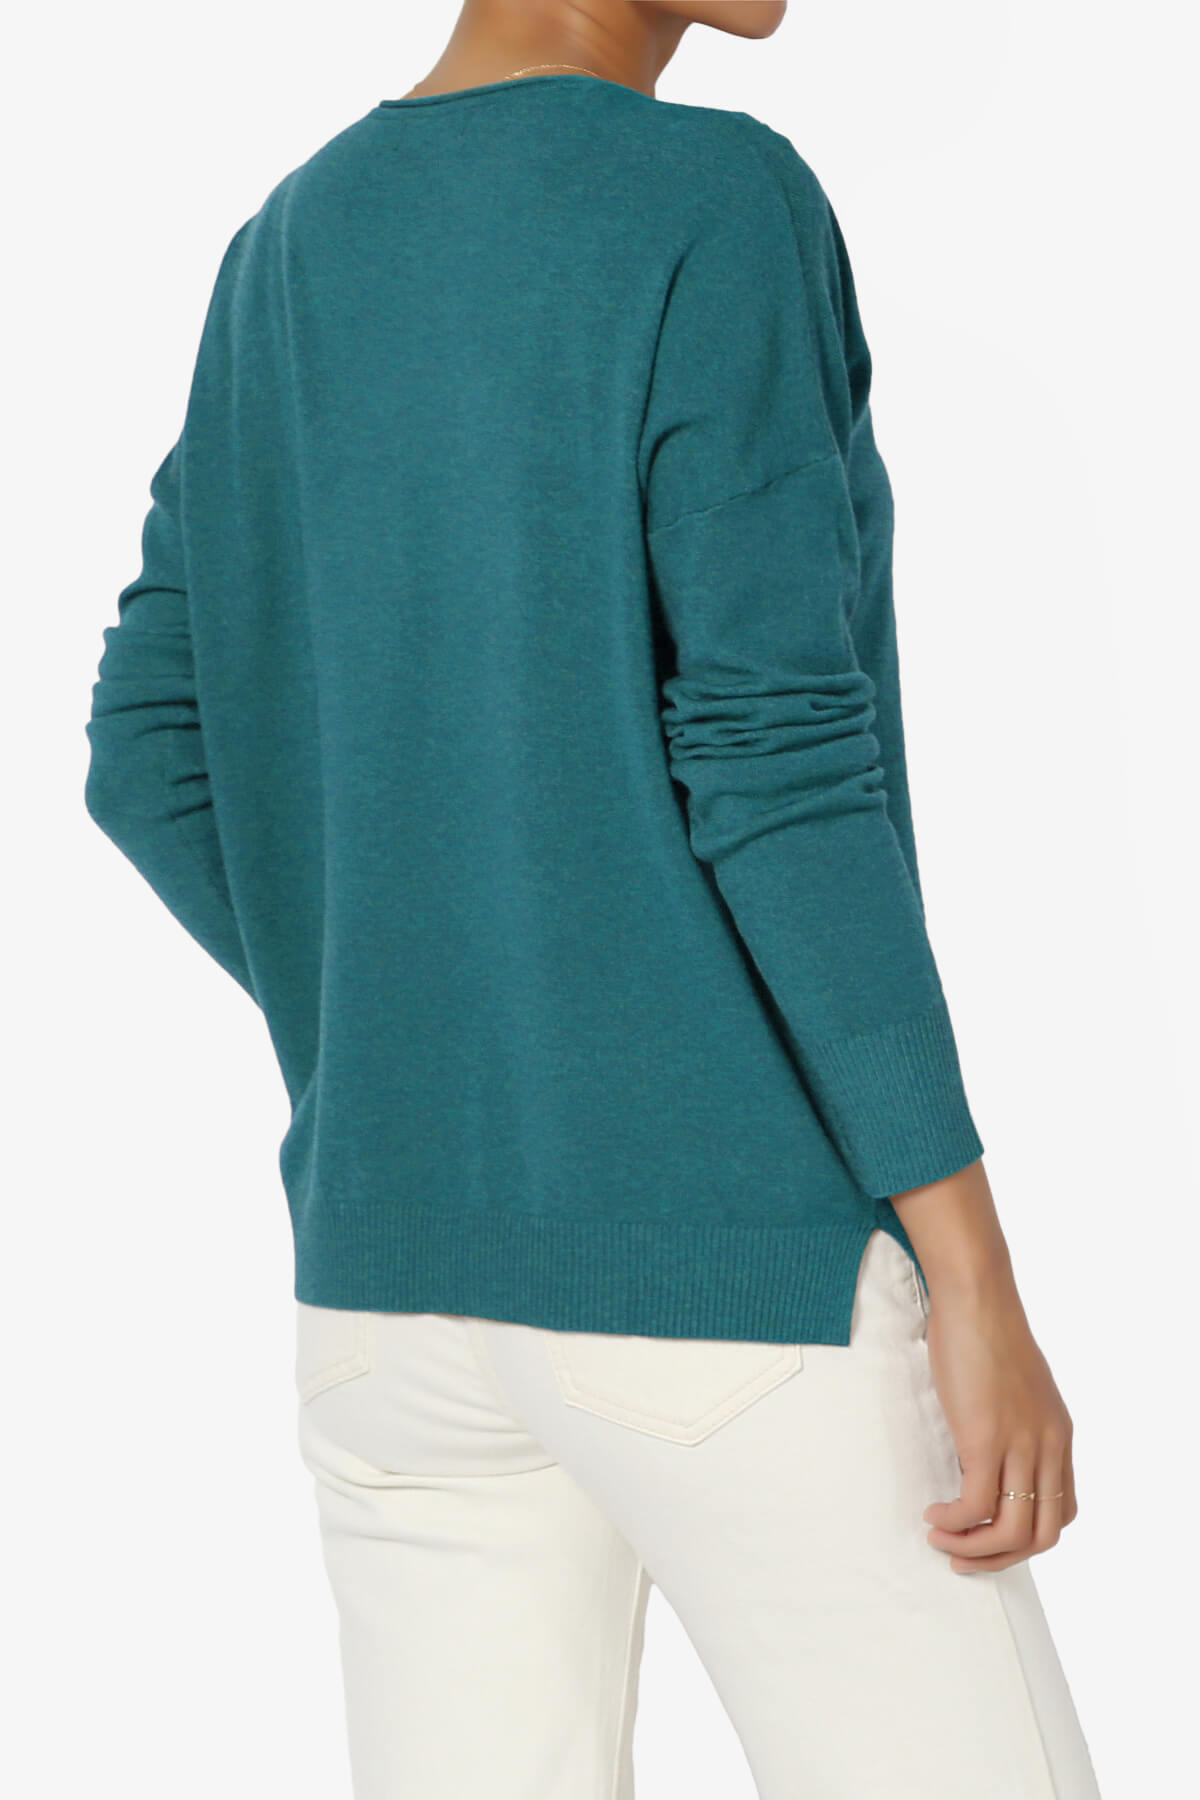 Carolina Long Sleeve Relaxed Fit Knit Top OCEAN TEAL_4